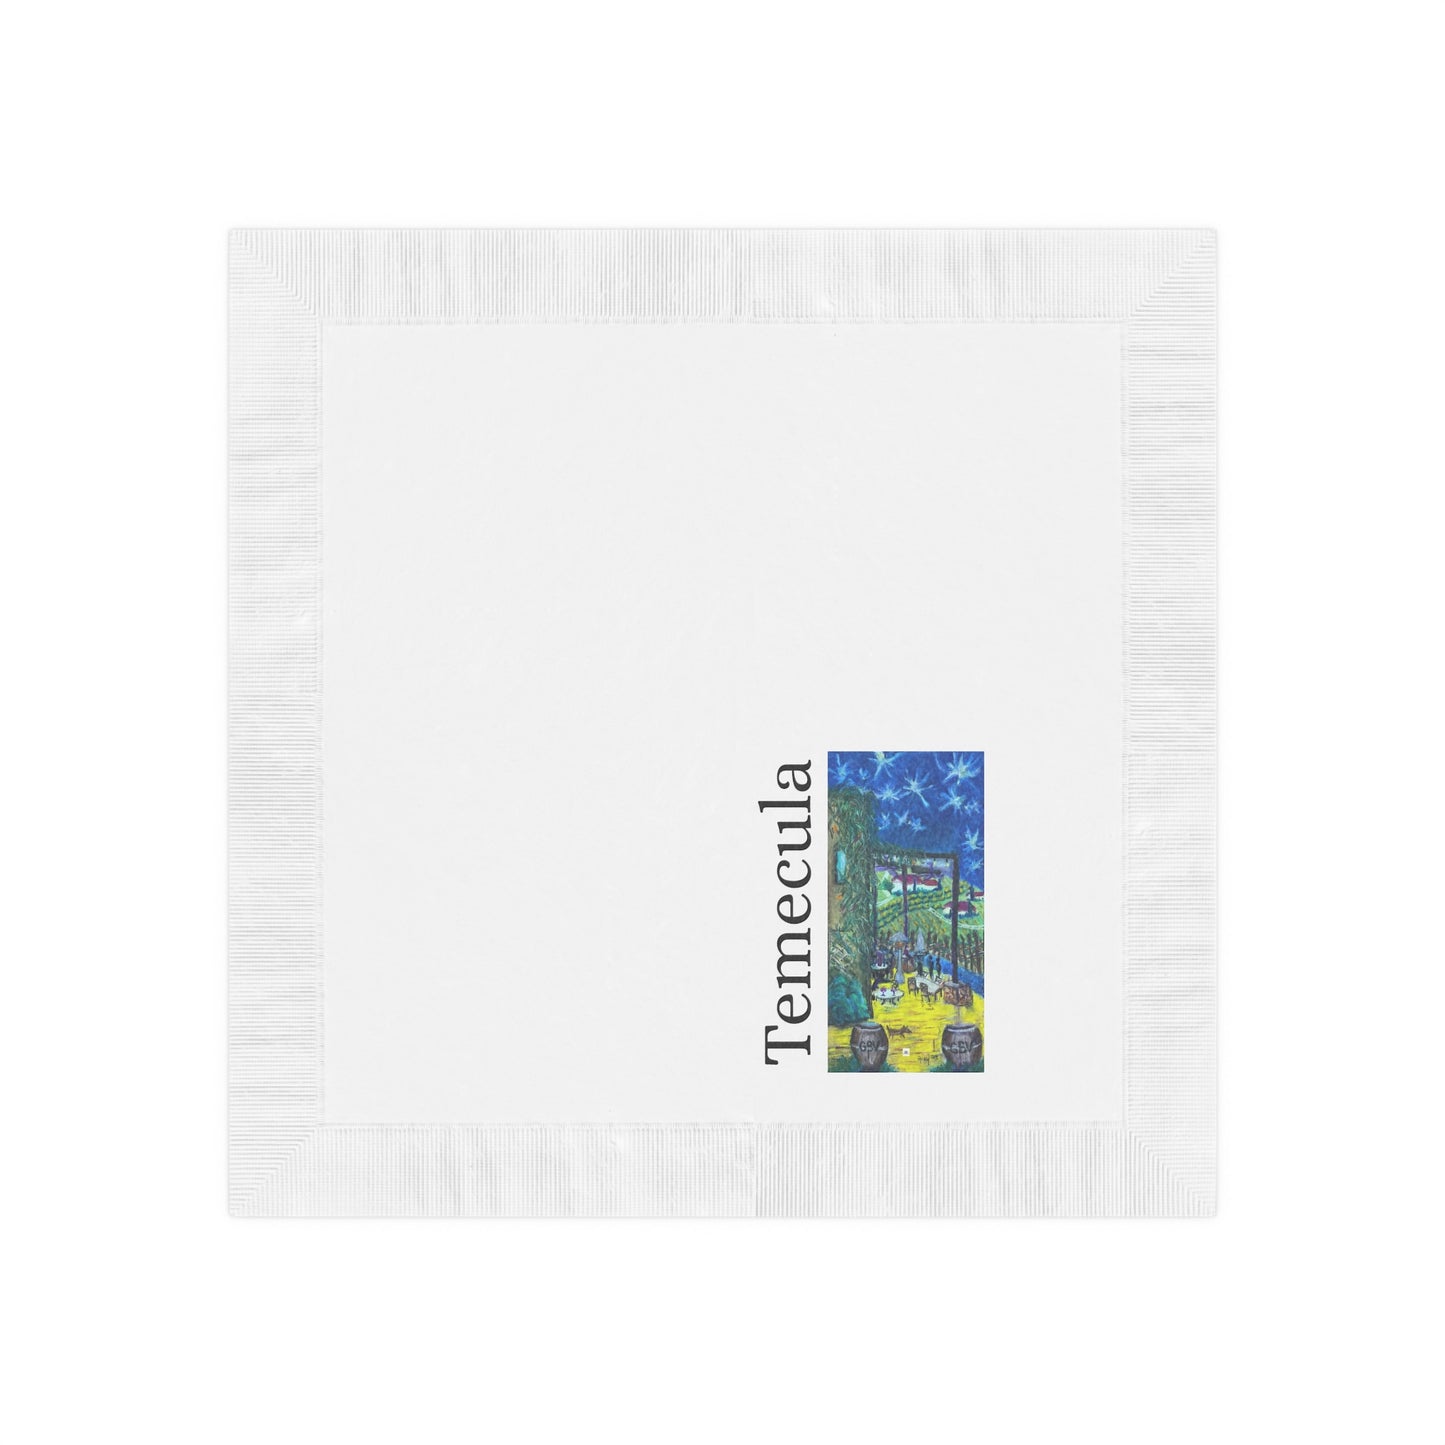 Twilight in Temecula-Temecula GBV-White Coined Napkins